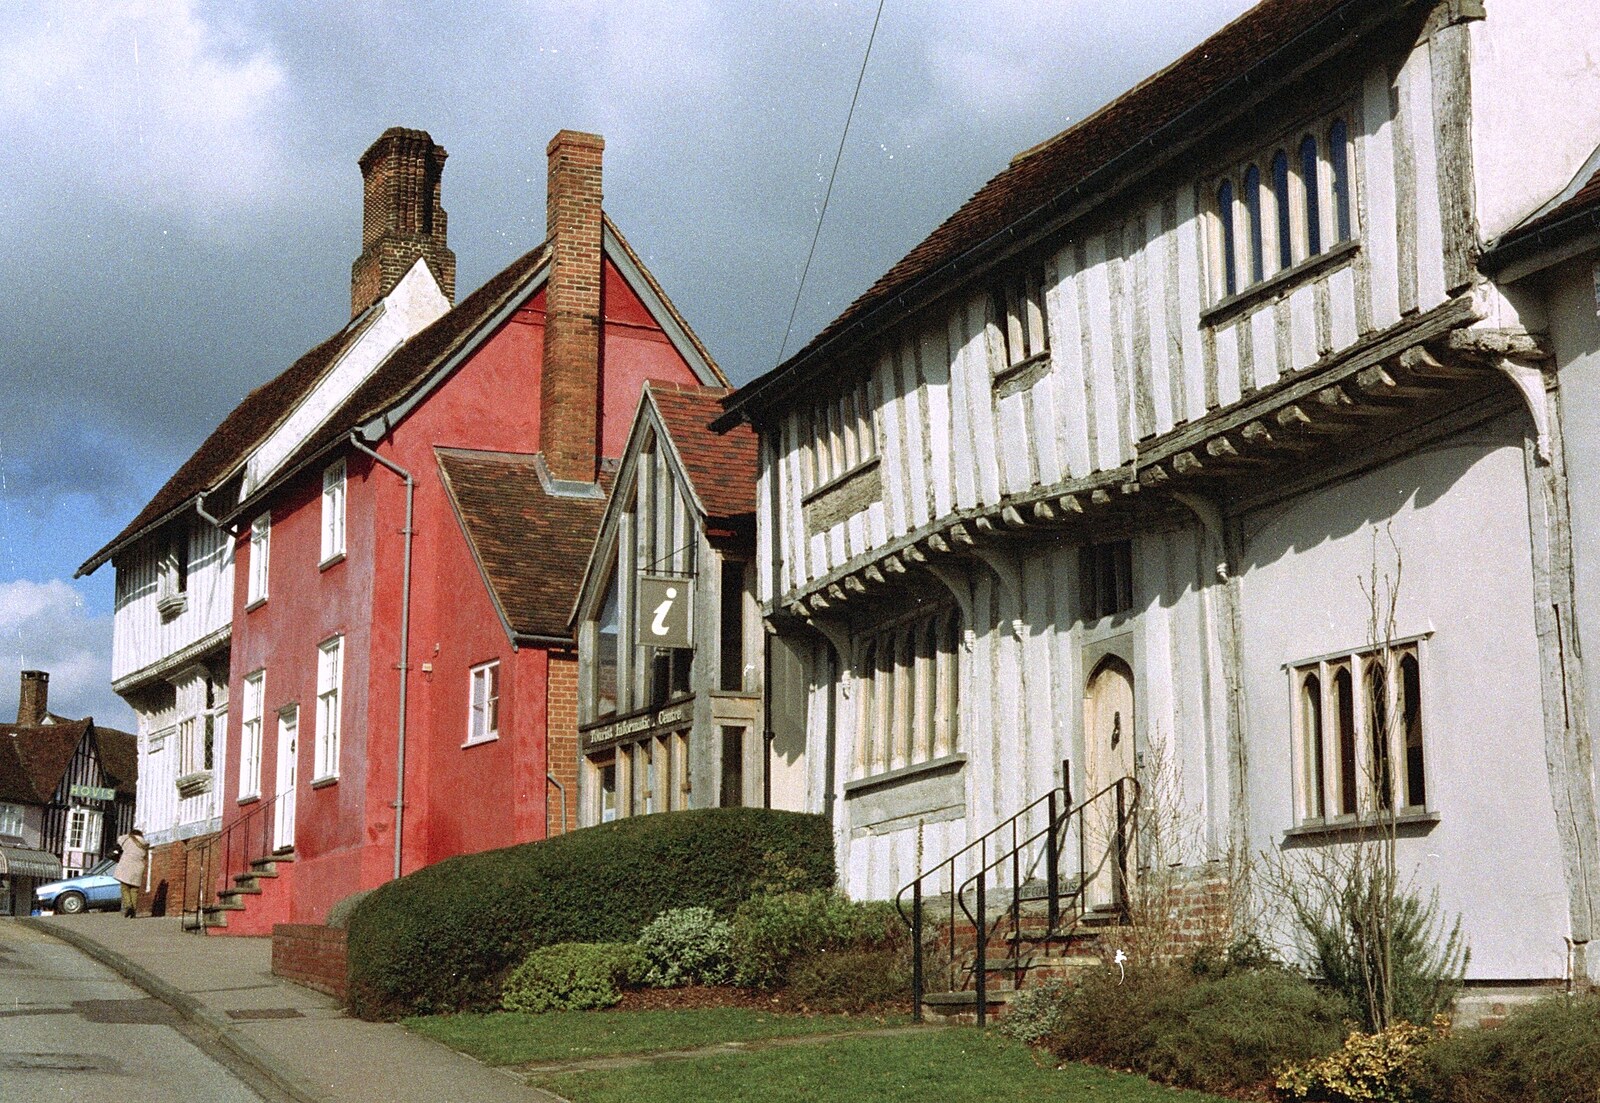 The Tourist Information office from Mother and Mike Visit, Lavenham, Suffolk - 14th April 1996